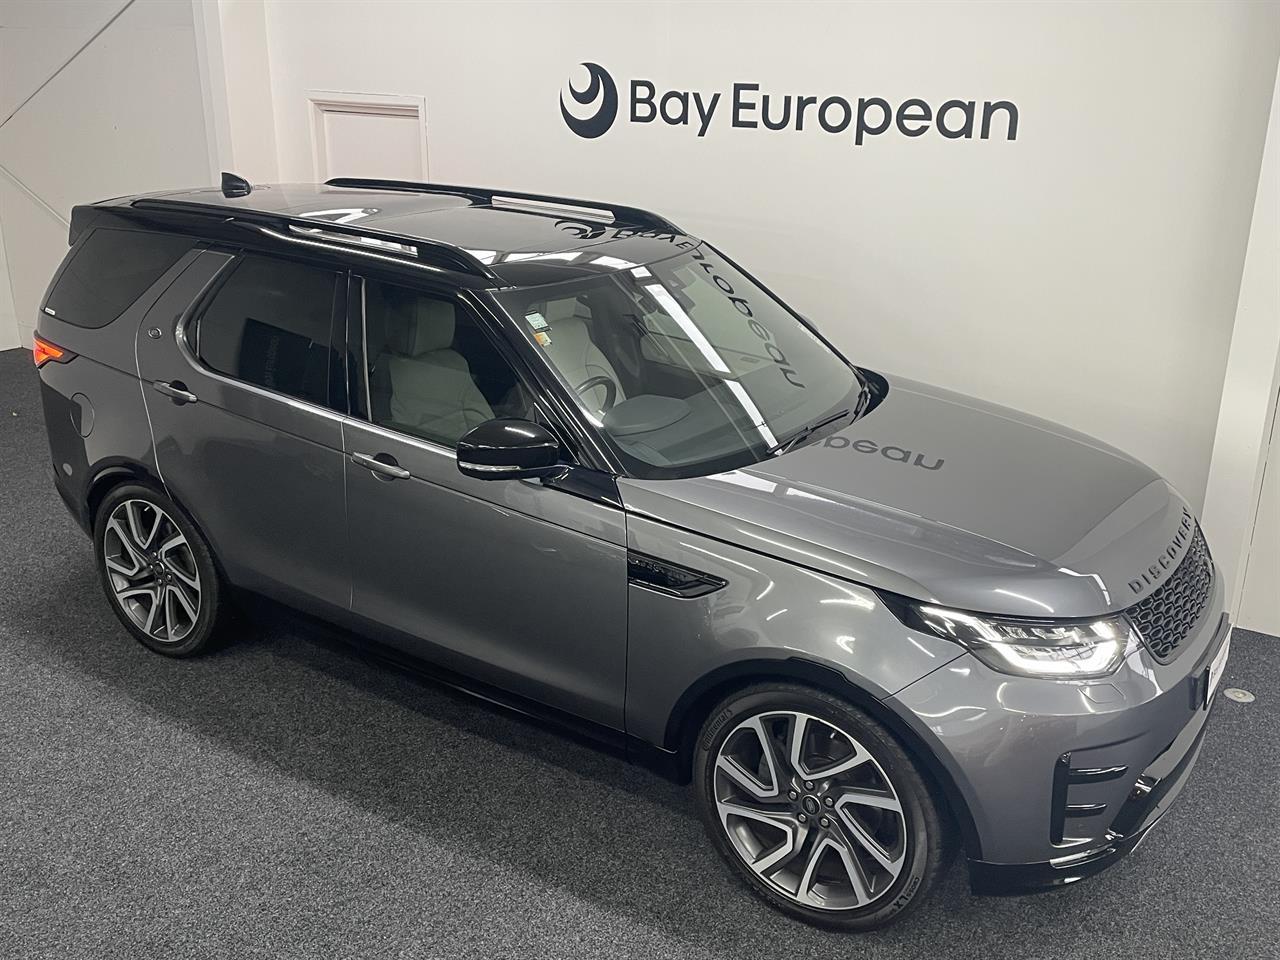 2018 Land Rover Discovery TD6 HSE Luxury 3.0D 7 Seater image 2